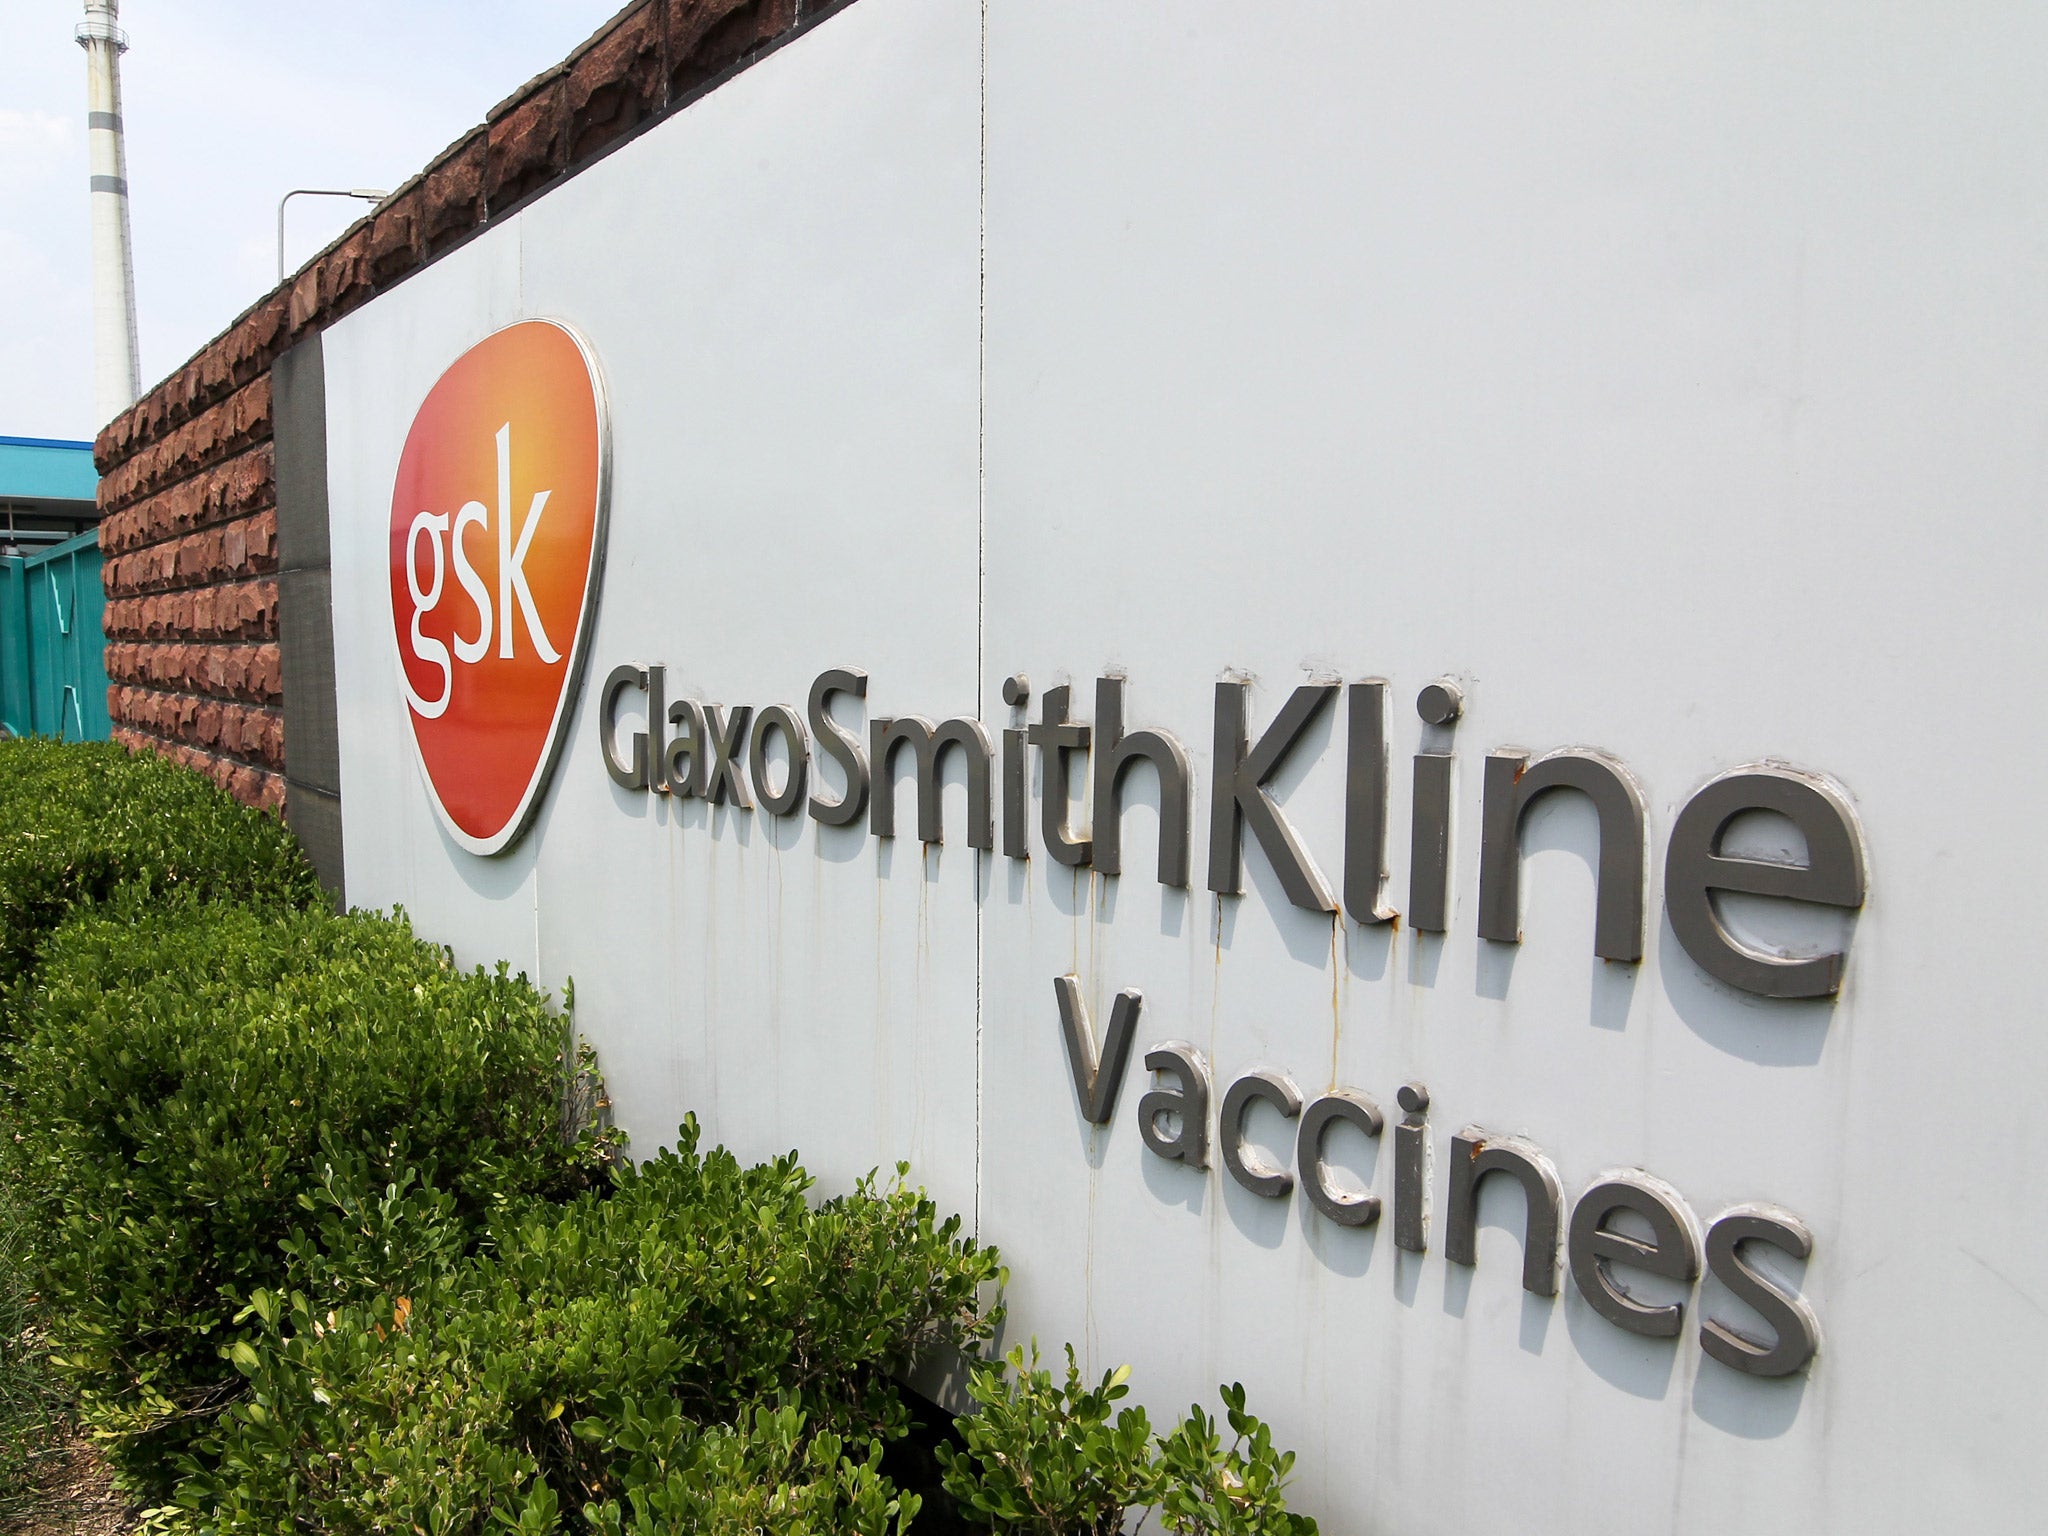 GSK is facing corruption allegations in its non-prescription business in Syria